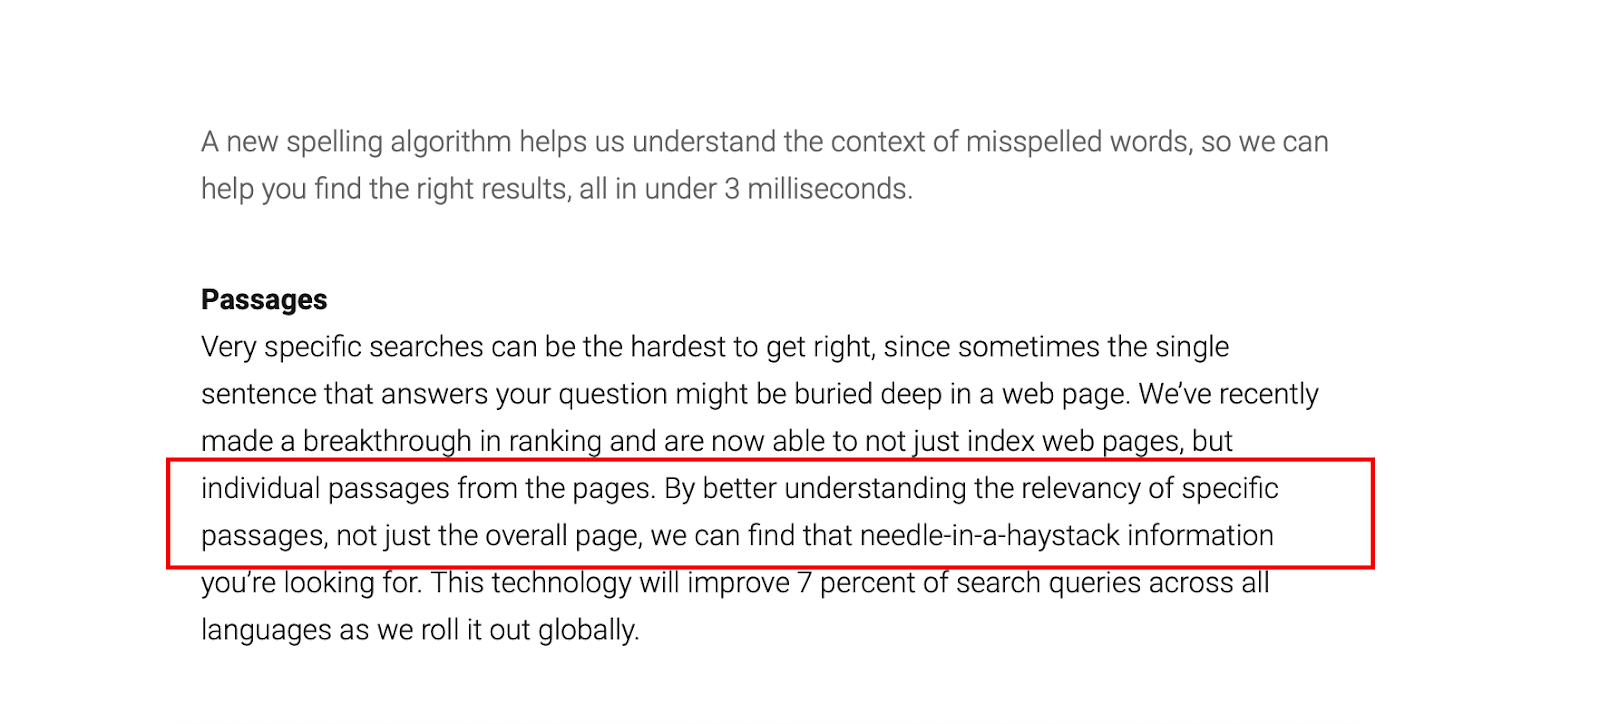 google on passage indexing